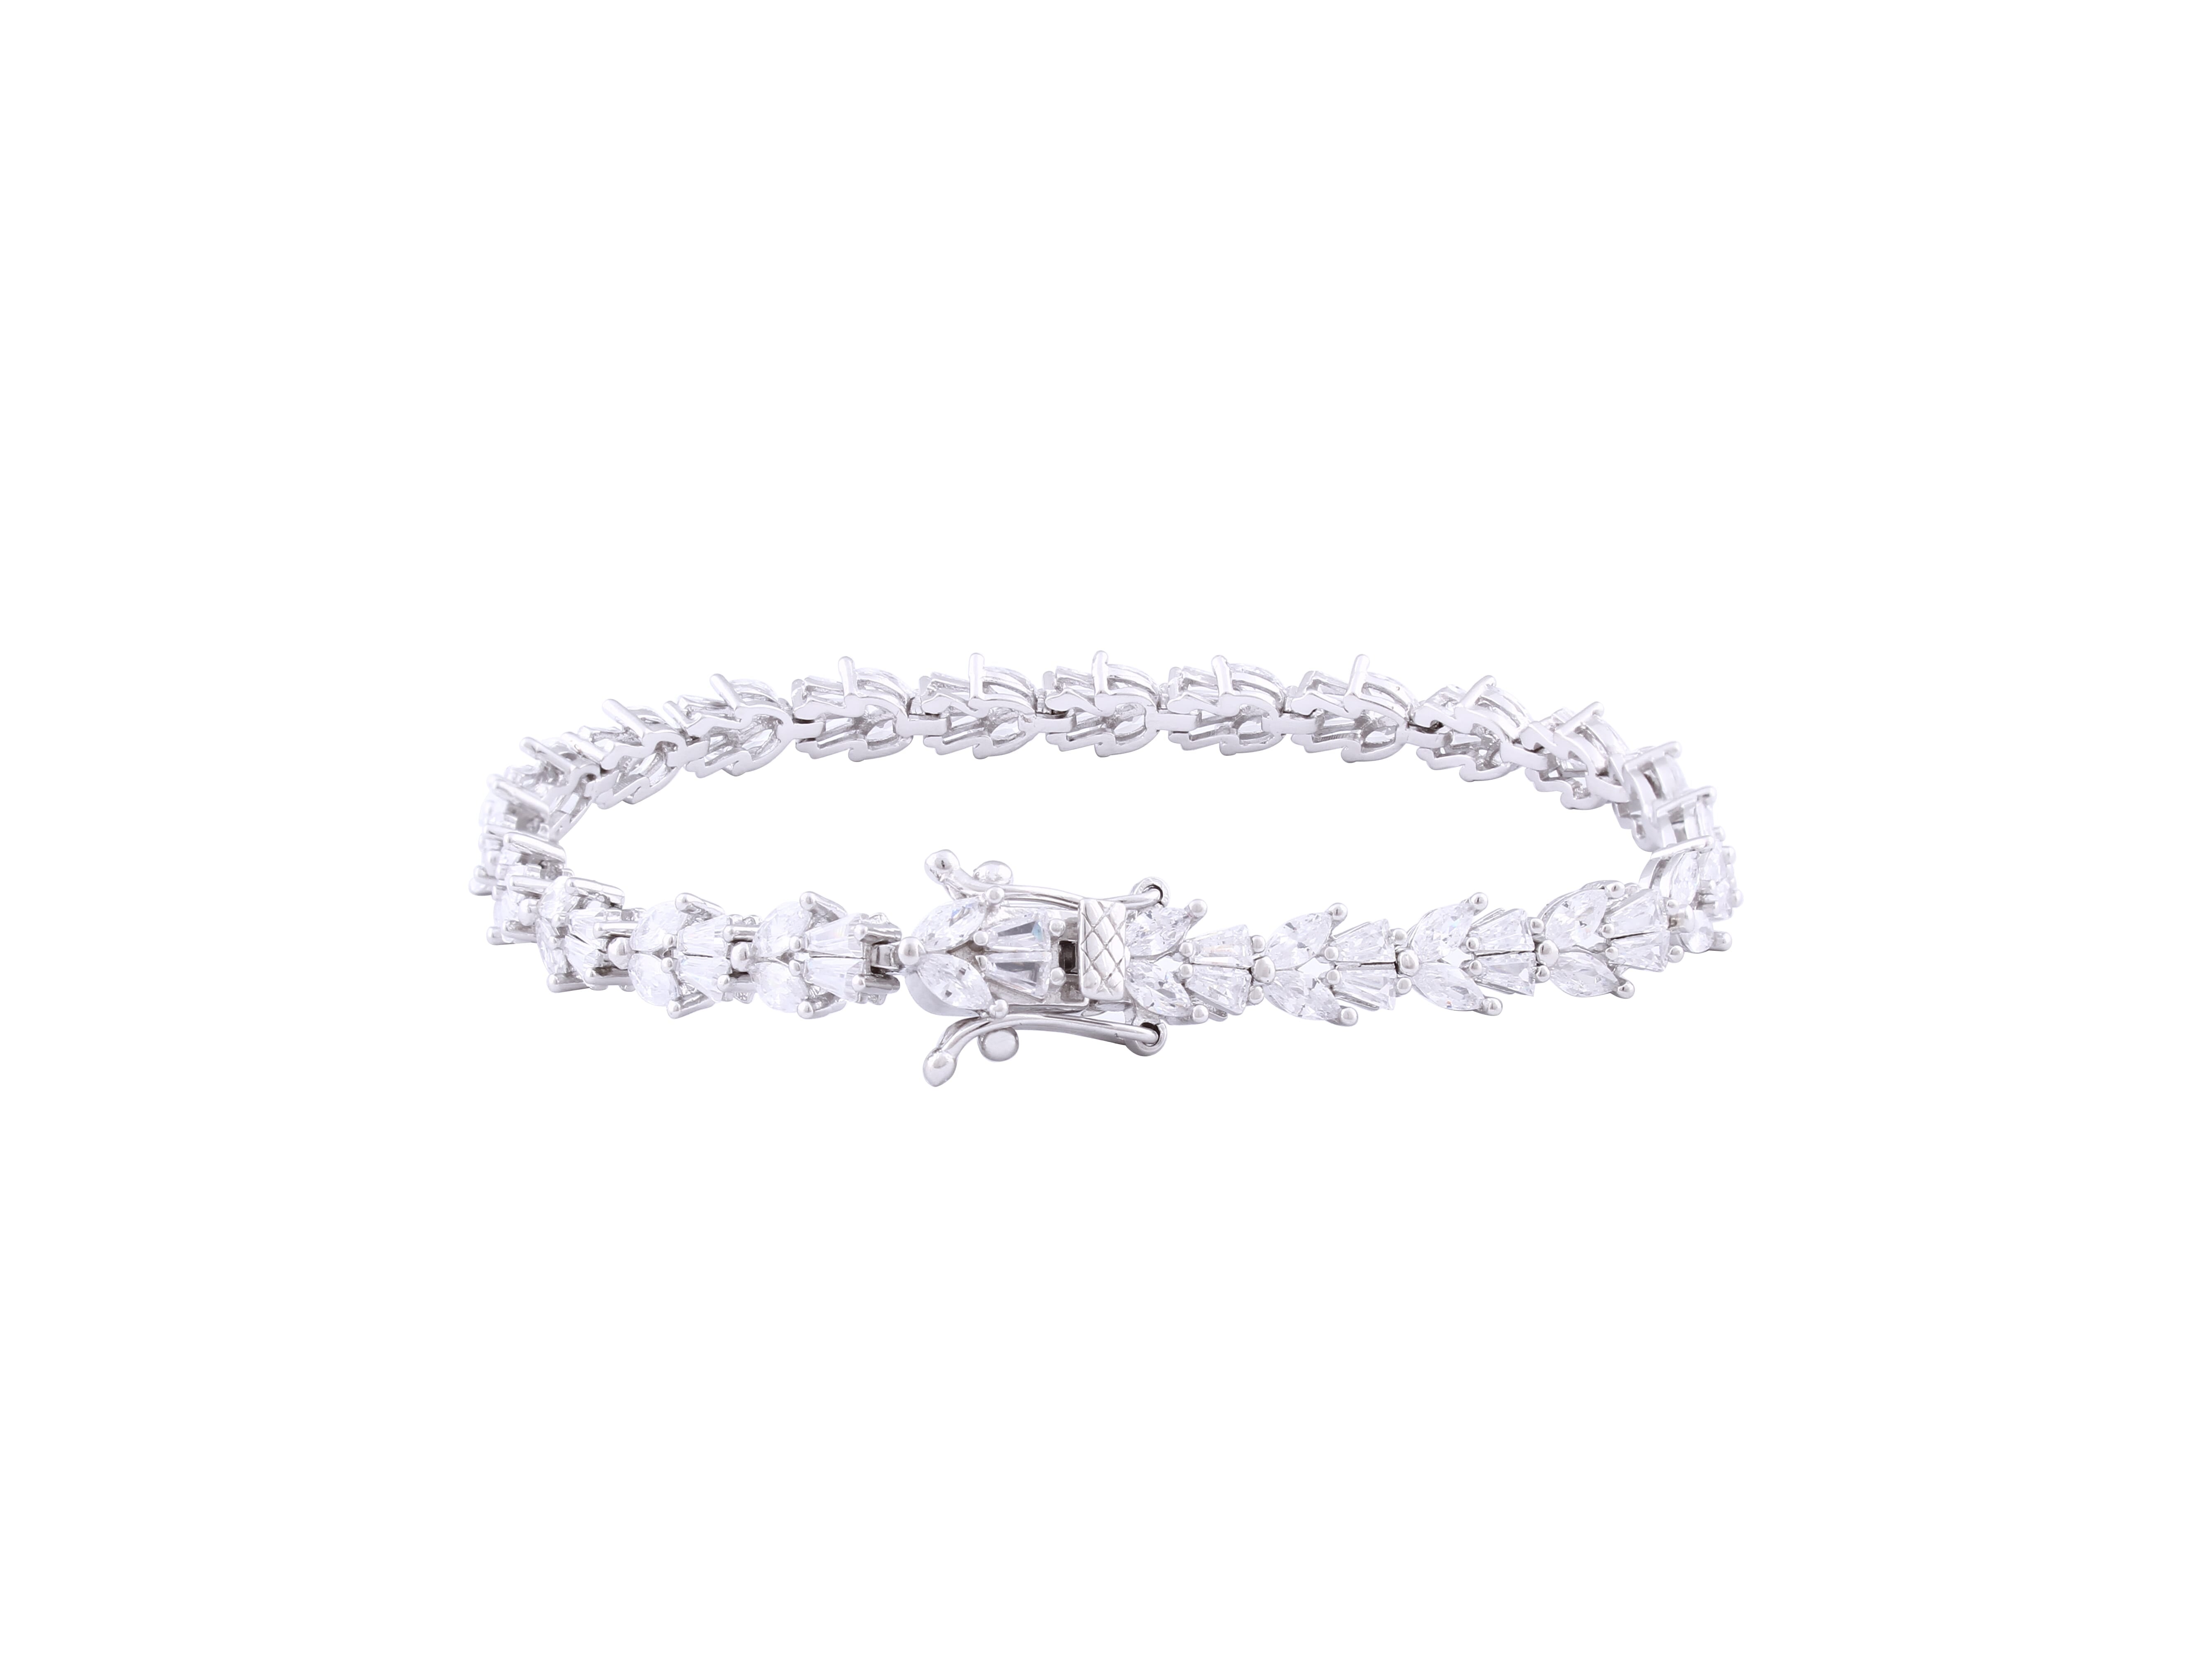 Asfour Tennis Bracelet Inlaid With Zircon Stones In 925 Sterling Silver  BR0466-W